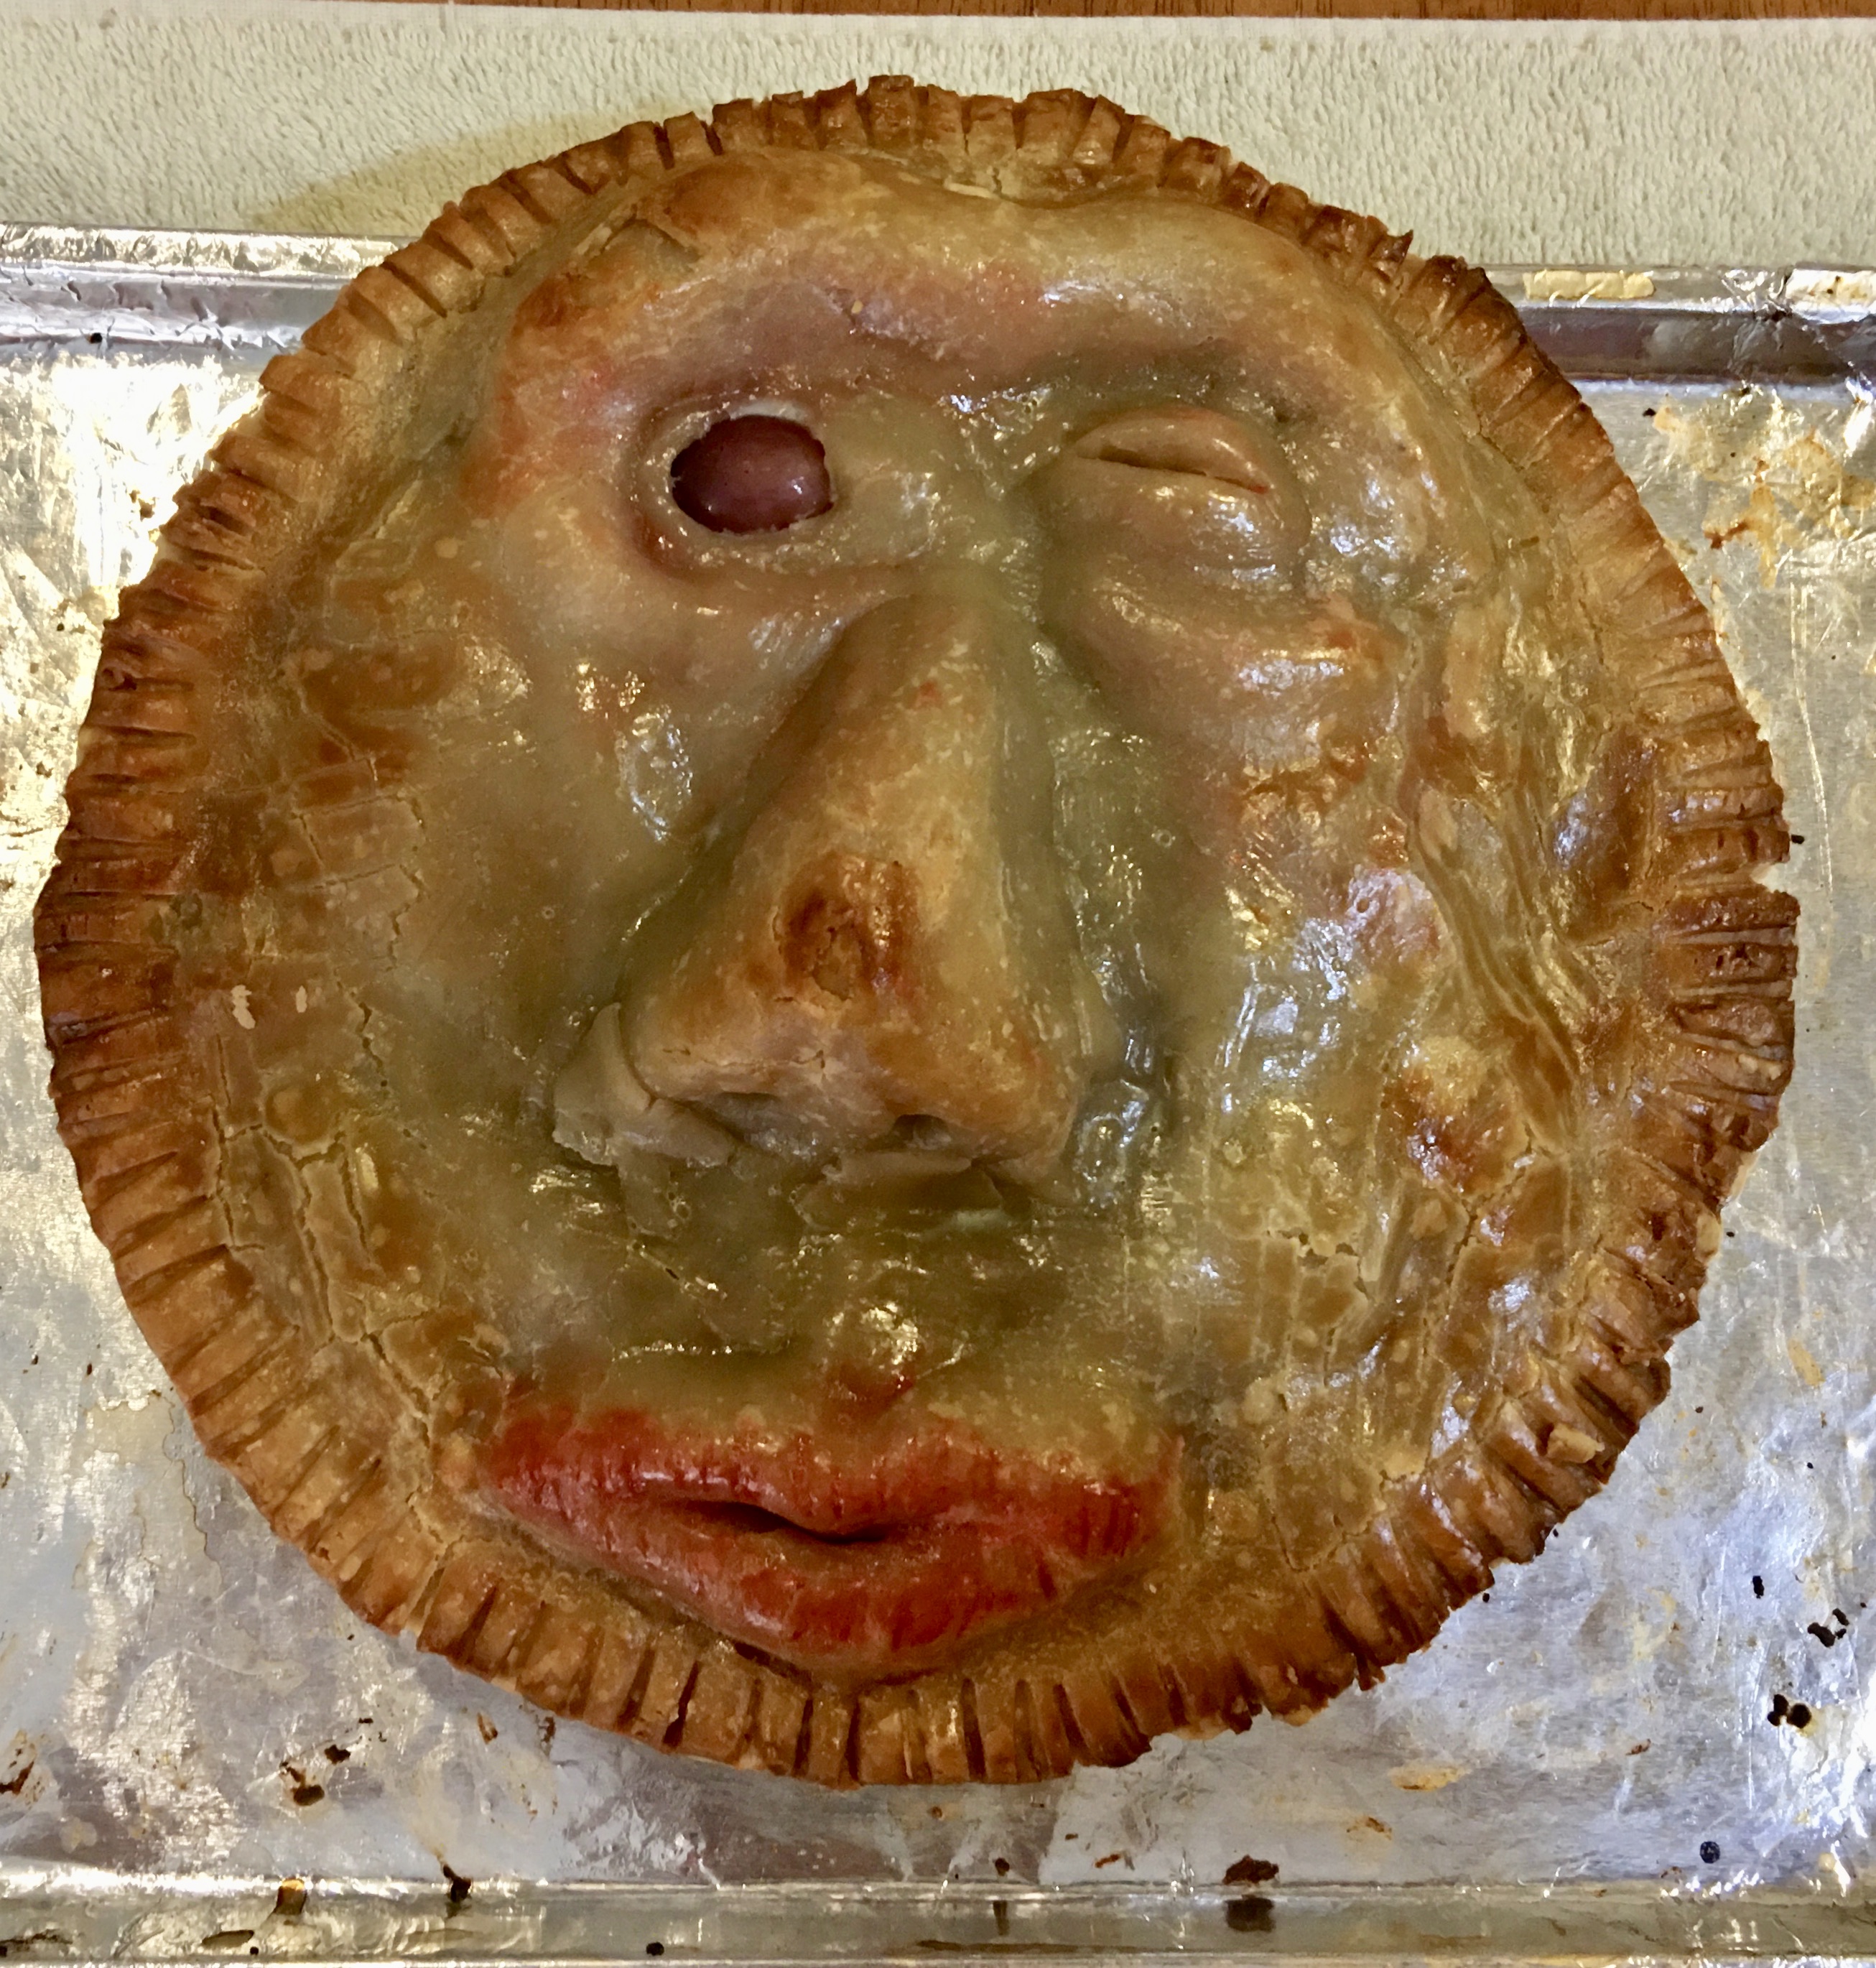 Peas and pies face